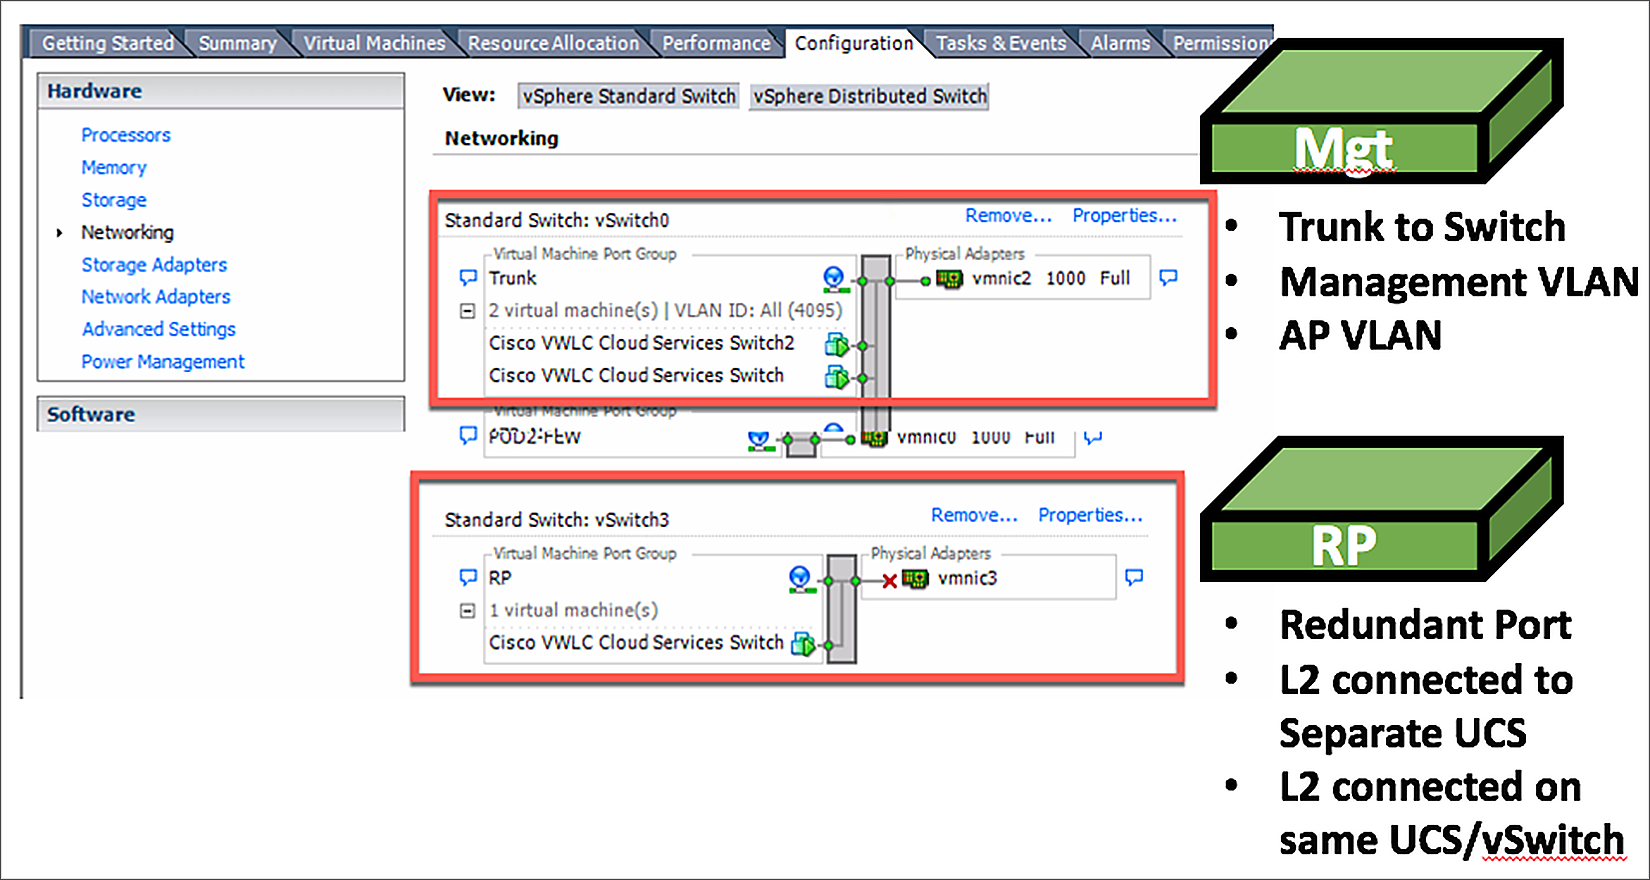 Mapping the hypervisor to the VM management interface